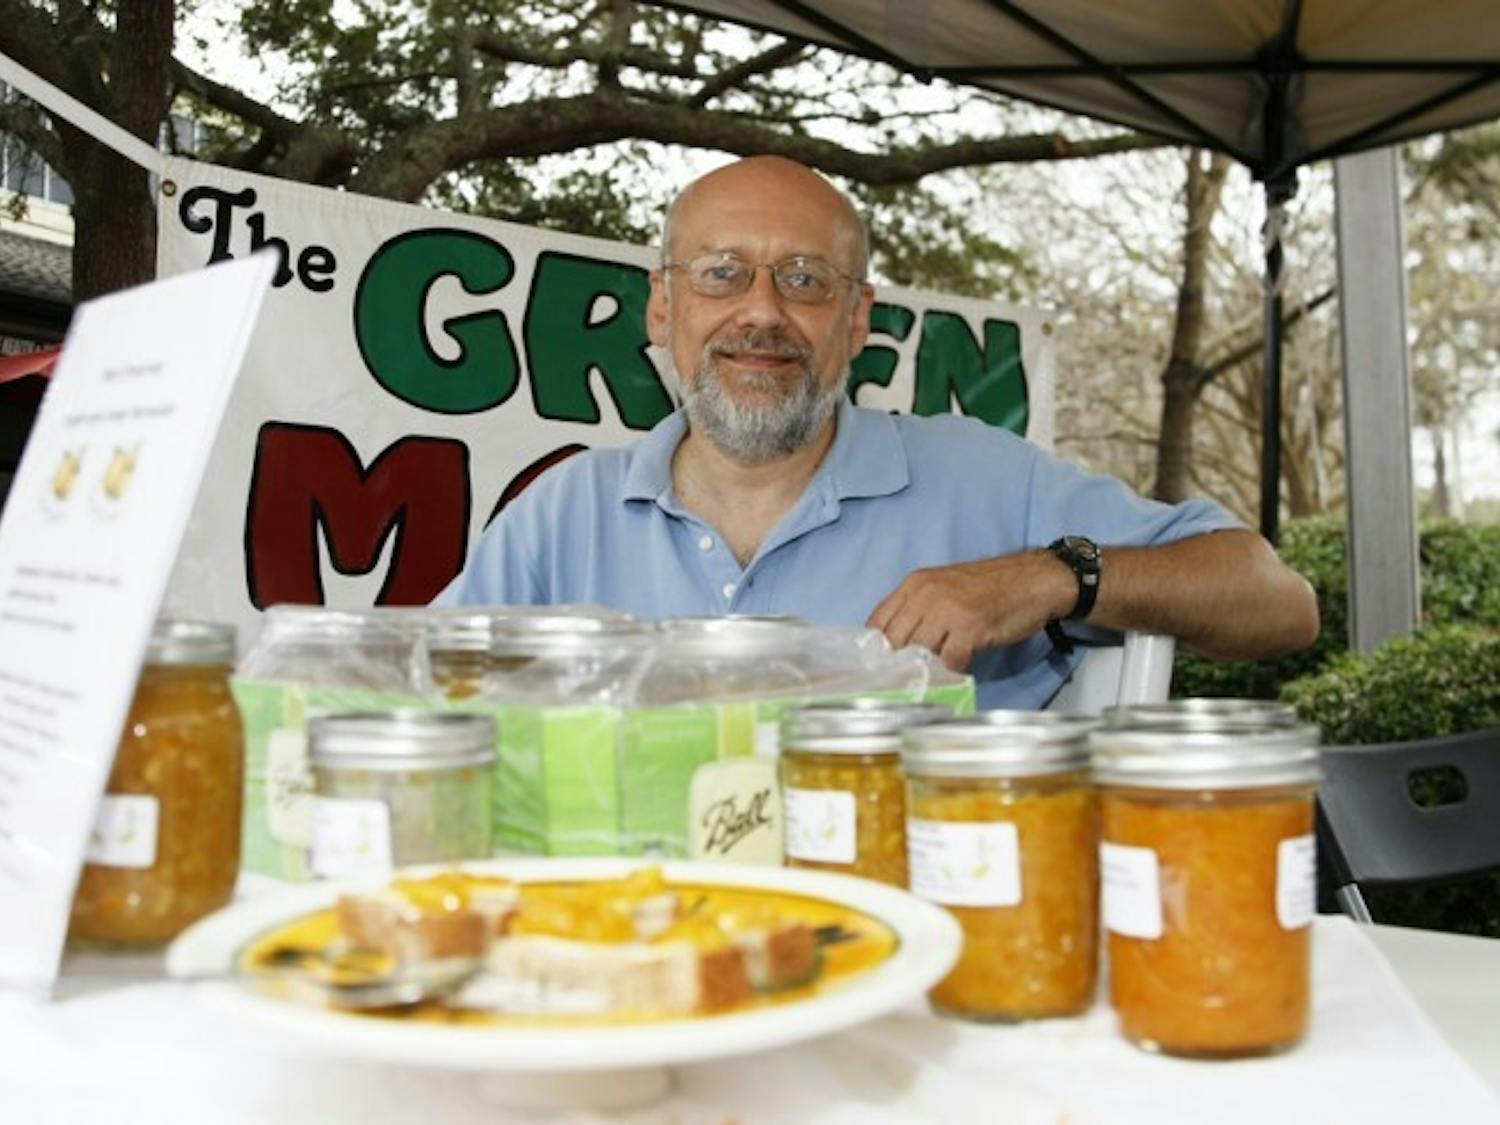 Craving homemade marmalade or freshly baked honey wheat berry bread? Look for Peter Turner's stand at the Thornebrook Village Farmers Market on Friday afternoons.